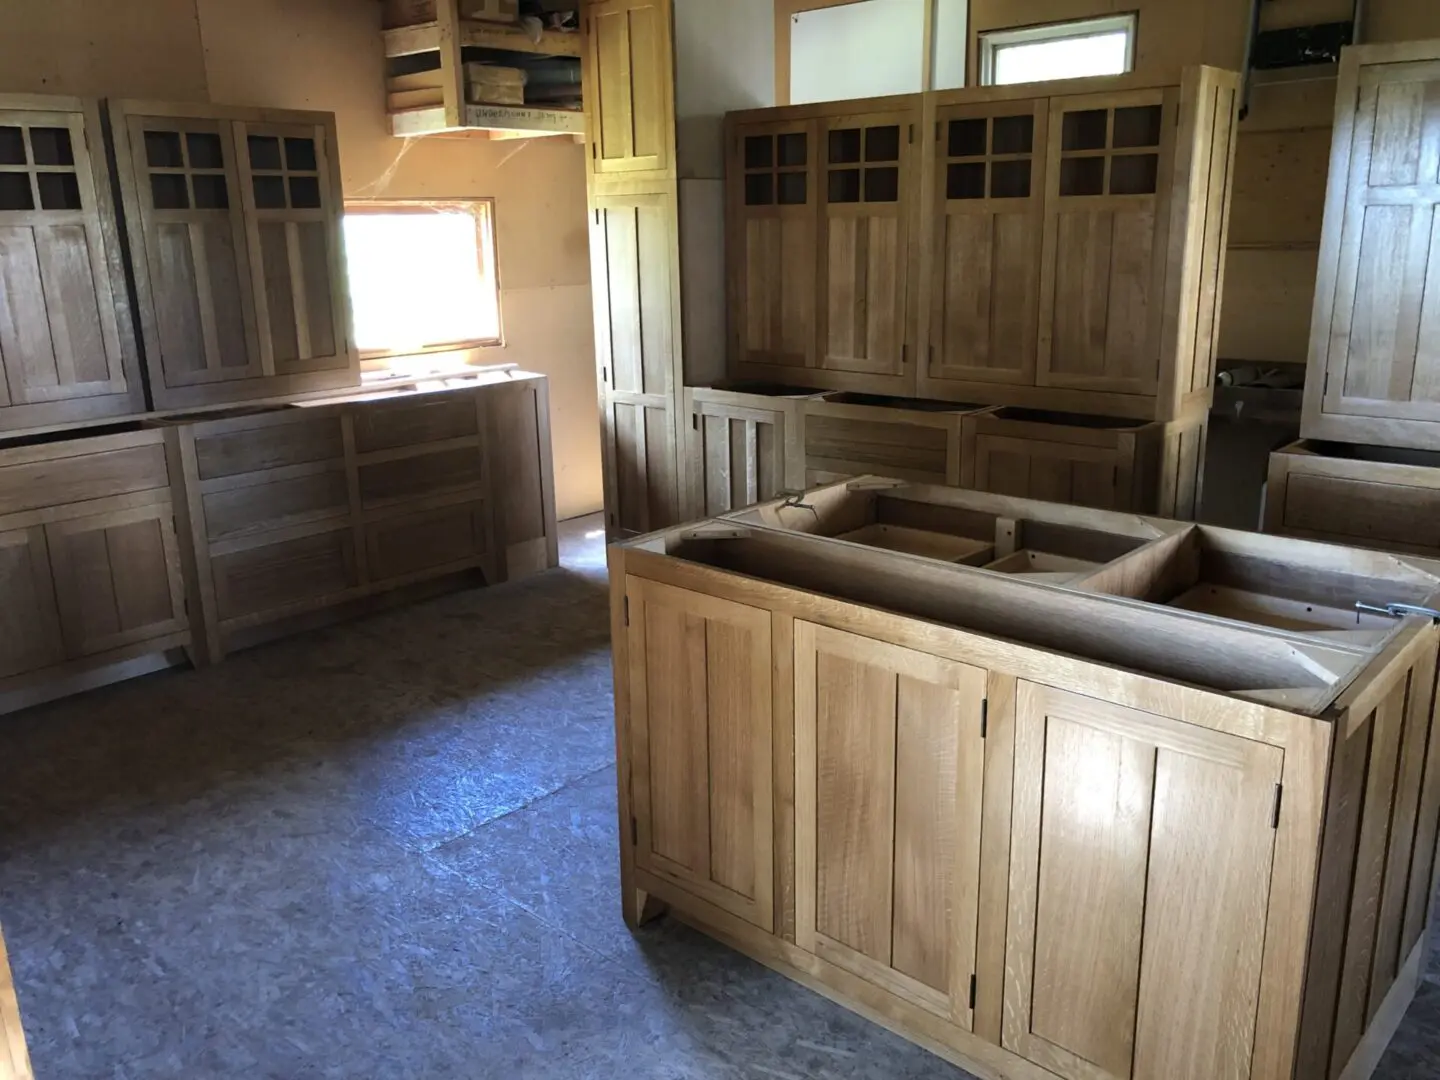 Mission Quartersawn White Oak kitchen getting ready for delivery